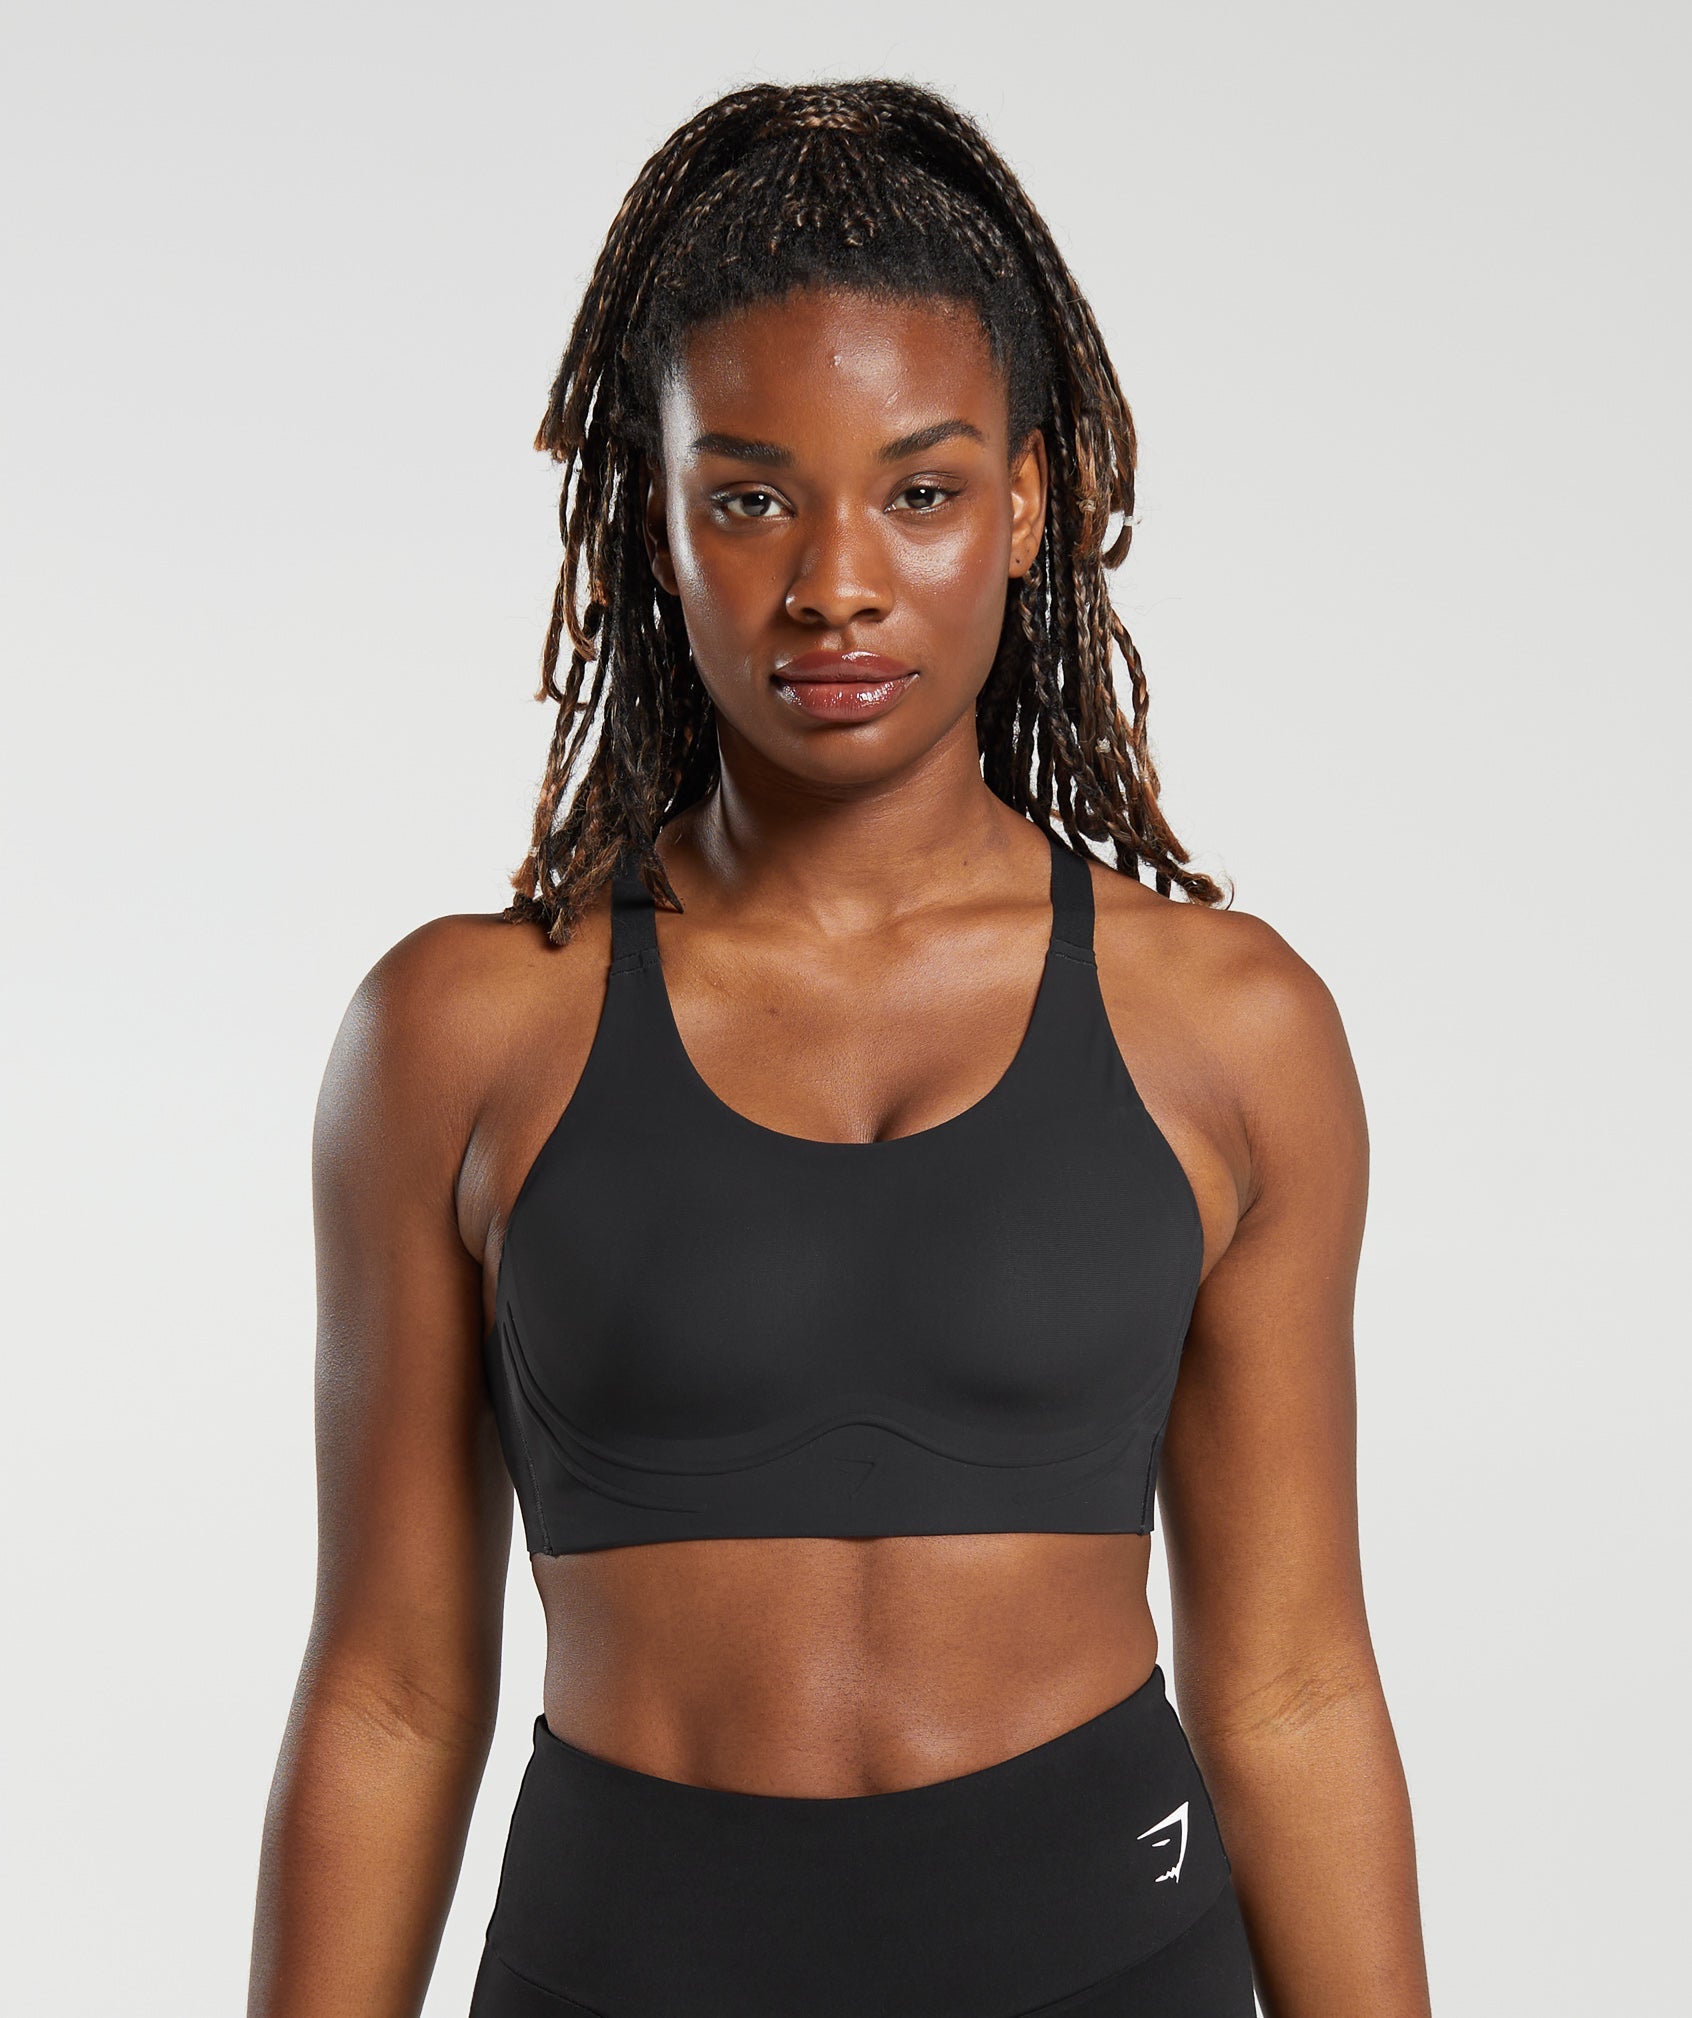 Replying to @nicolesmith2752 a high impact sports bra for larger